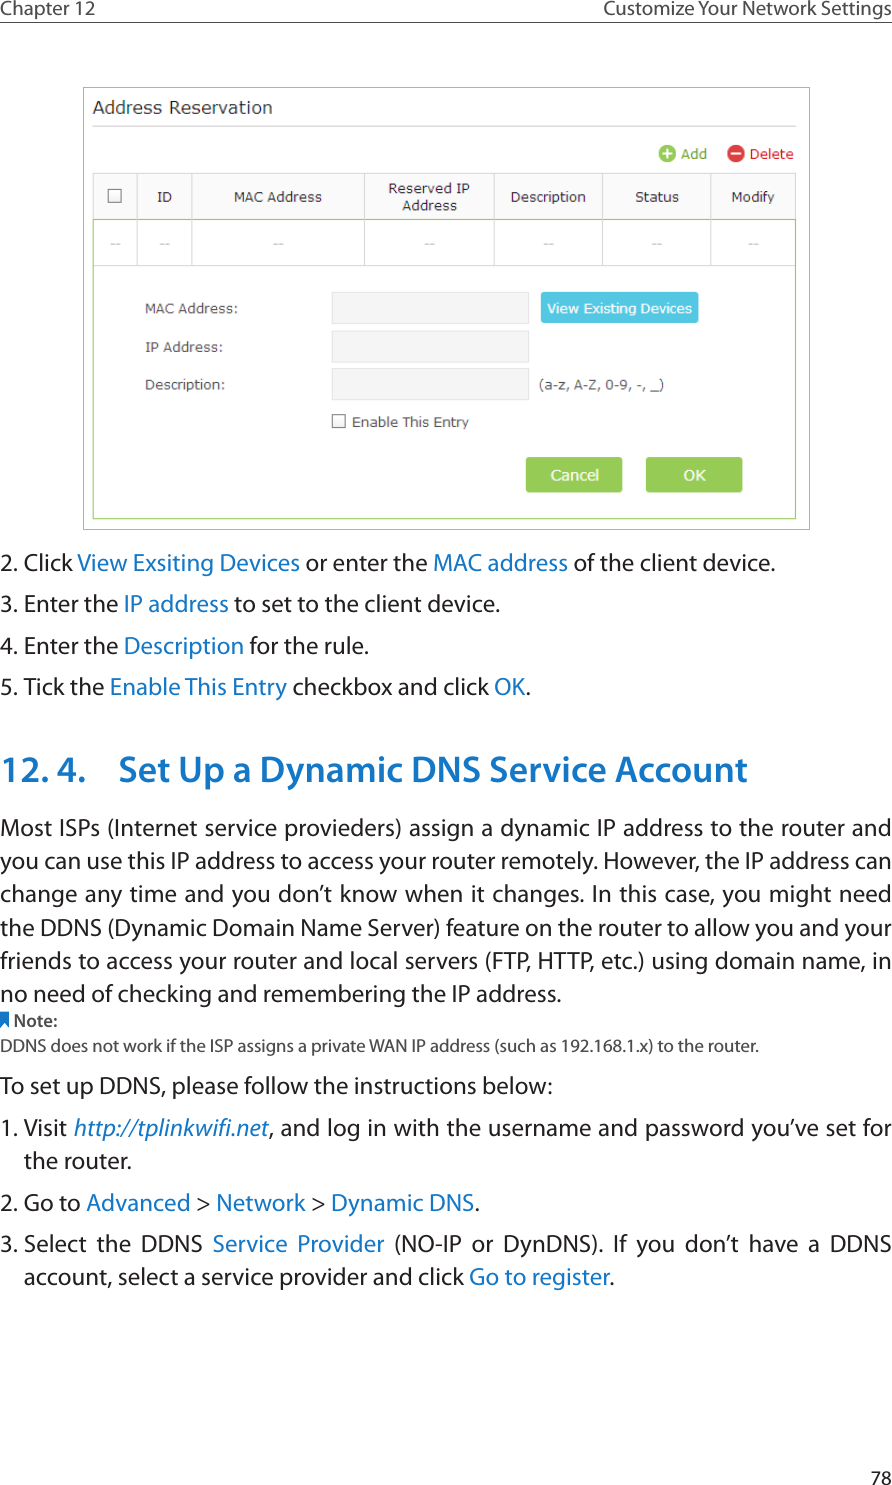 78Chapter 12 Customize Your Network Settings2. Click View Exsiting Devices or enter the MAC address of the client device.3. Enter the IP address to set to the client device.4. Enter the Description for the rule.5. Tick the Enable This Entry checkbox and click OK. 12. 4.  Set Up a Dynamic DNS Service AccountMost ISPs (Internet service provieders) assign a dynamic IP address to the router and you can use this IP address to access your router remotely. However, the IP address can change any time and you don’t know when it changes. In this case, you might need the DDNS (Dynamic Domain Name Server) feature on the router to allow you and your friends to access your router and local servers (FTP, HTTP, etc.) using domain name, in no need of checking and remembering the IP address. Note: DDNS does not work if the ISP assigns a private WAN IP address (such as 192.168.1.x) to the router. To set up DDNS, please follow the instructions below:1. Visit http://tplinkwifi.net, and log in with the username and password you’ve set for the router.2. Go to Advanced &gt; Network &gt; Dynamic DNS.3. Select the DDNS Service Provider (NO-IP or DynDNS). If you don’t have a DDNS account, select a service provider and click Go to register.